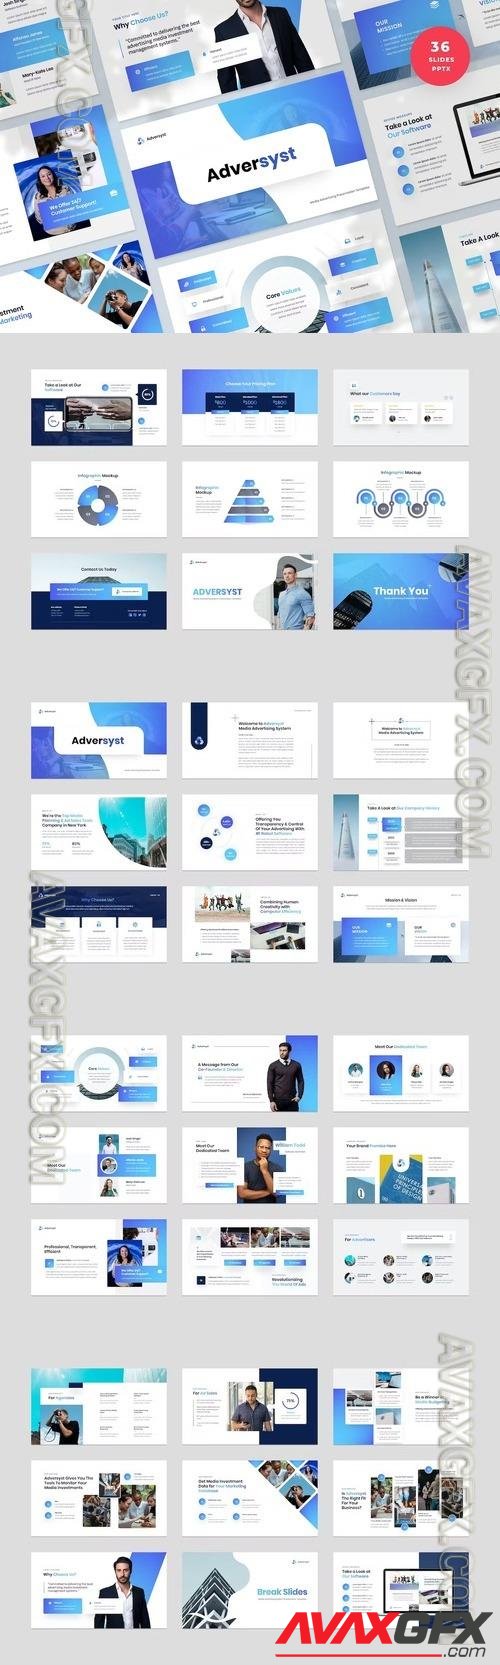 Media Advertising System PowerPoint Template [PPTX]